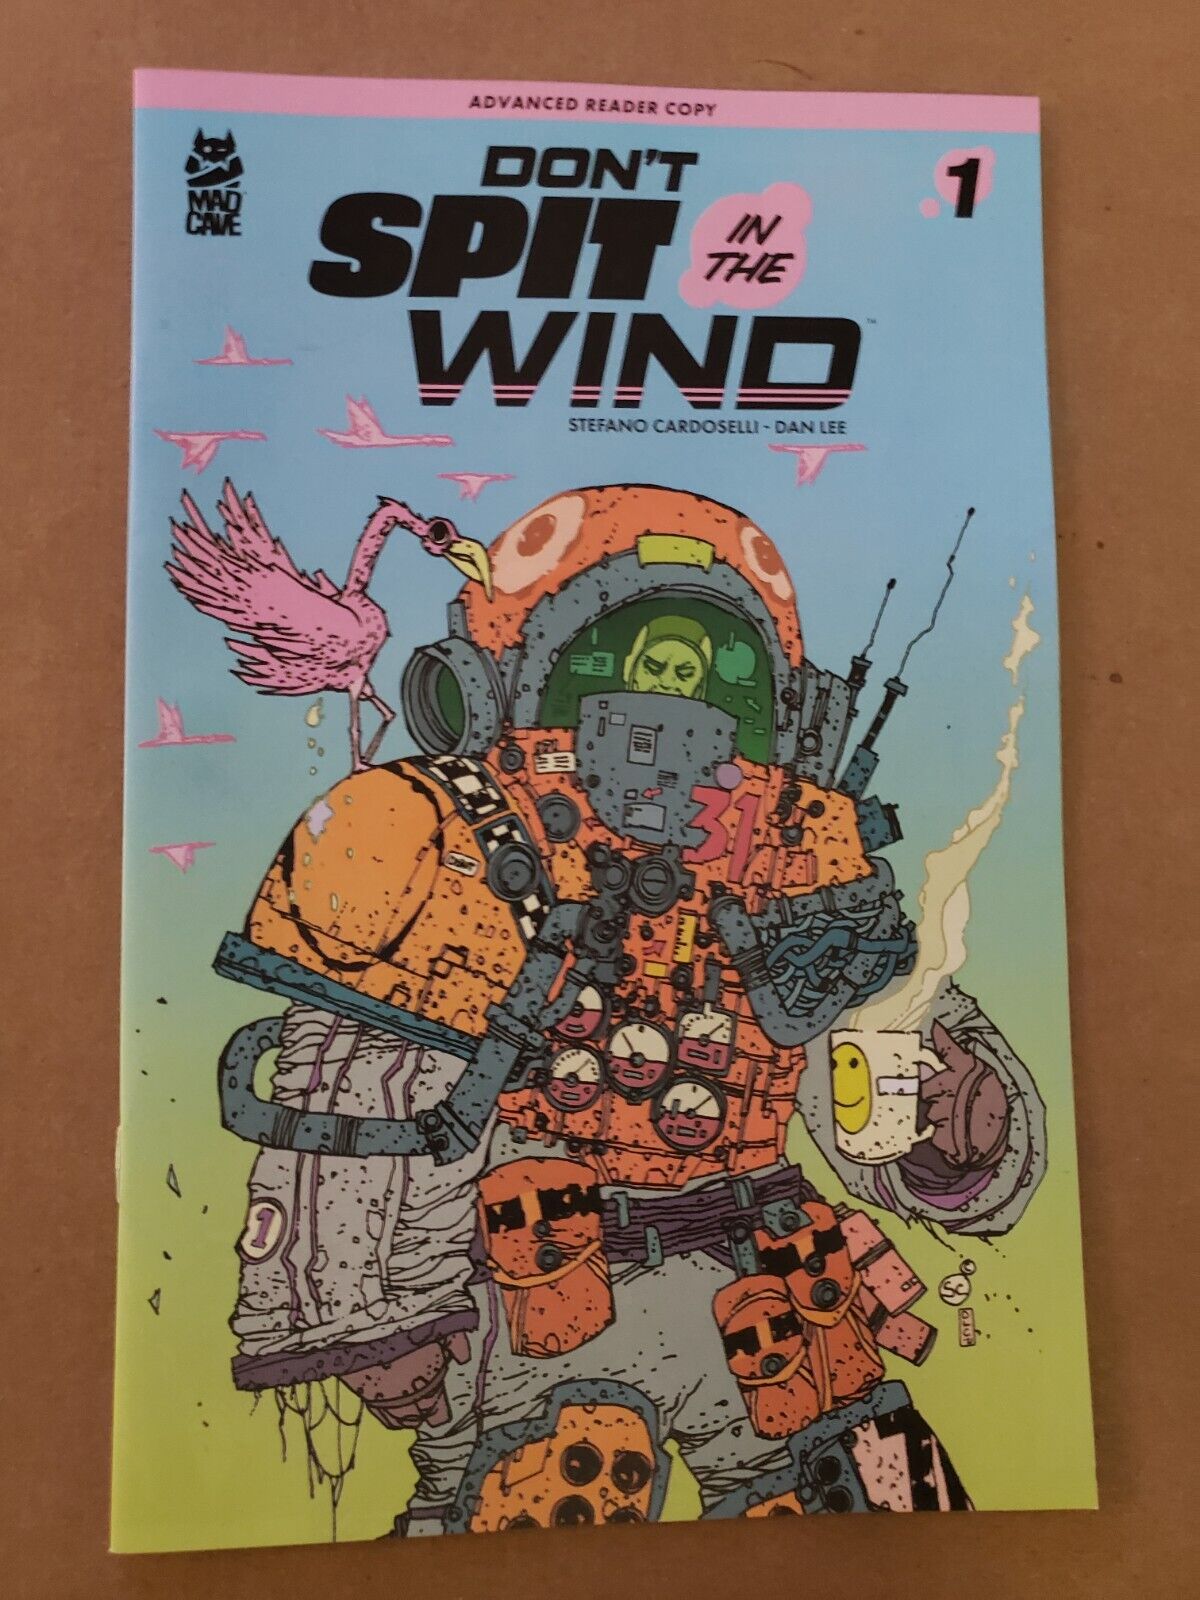 DONT SPIT IN THE WIND #1 ADVANCED READER COPY VARIANT MAD CAVE LEE COMIC BOOK